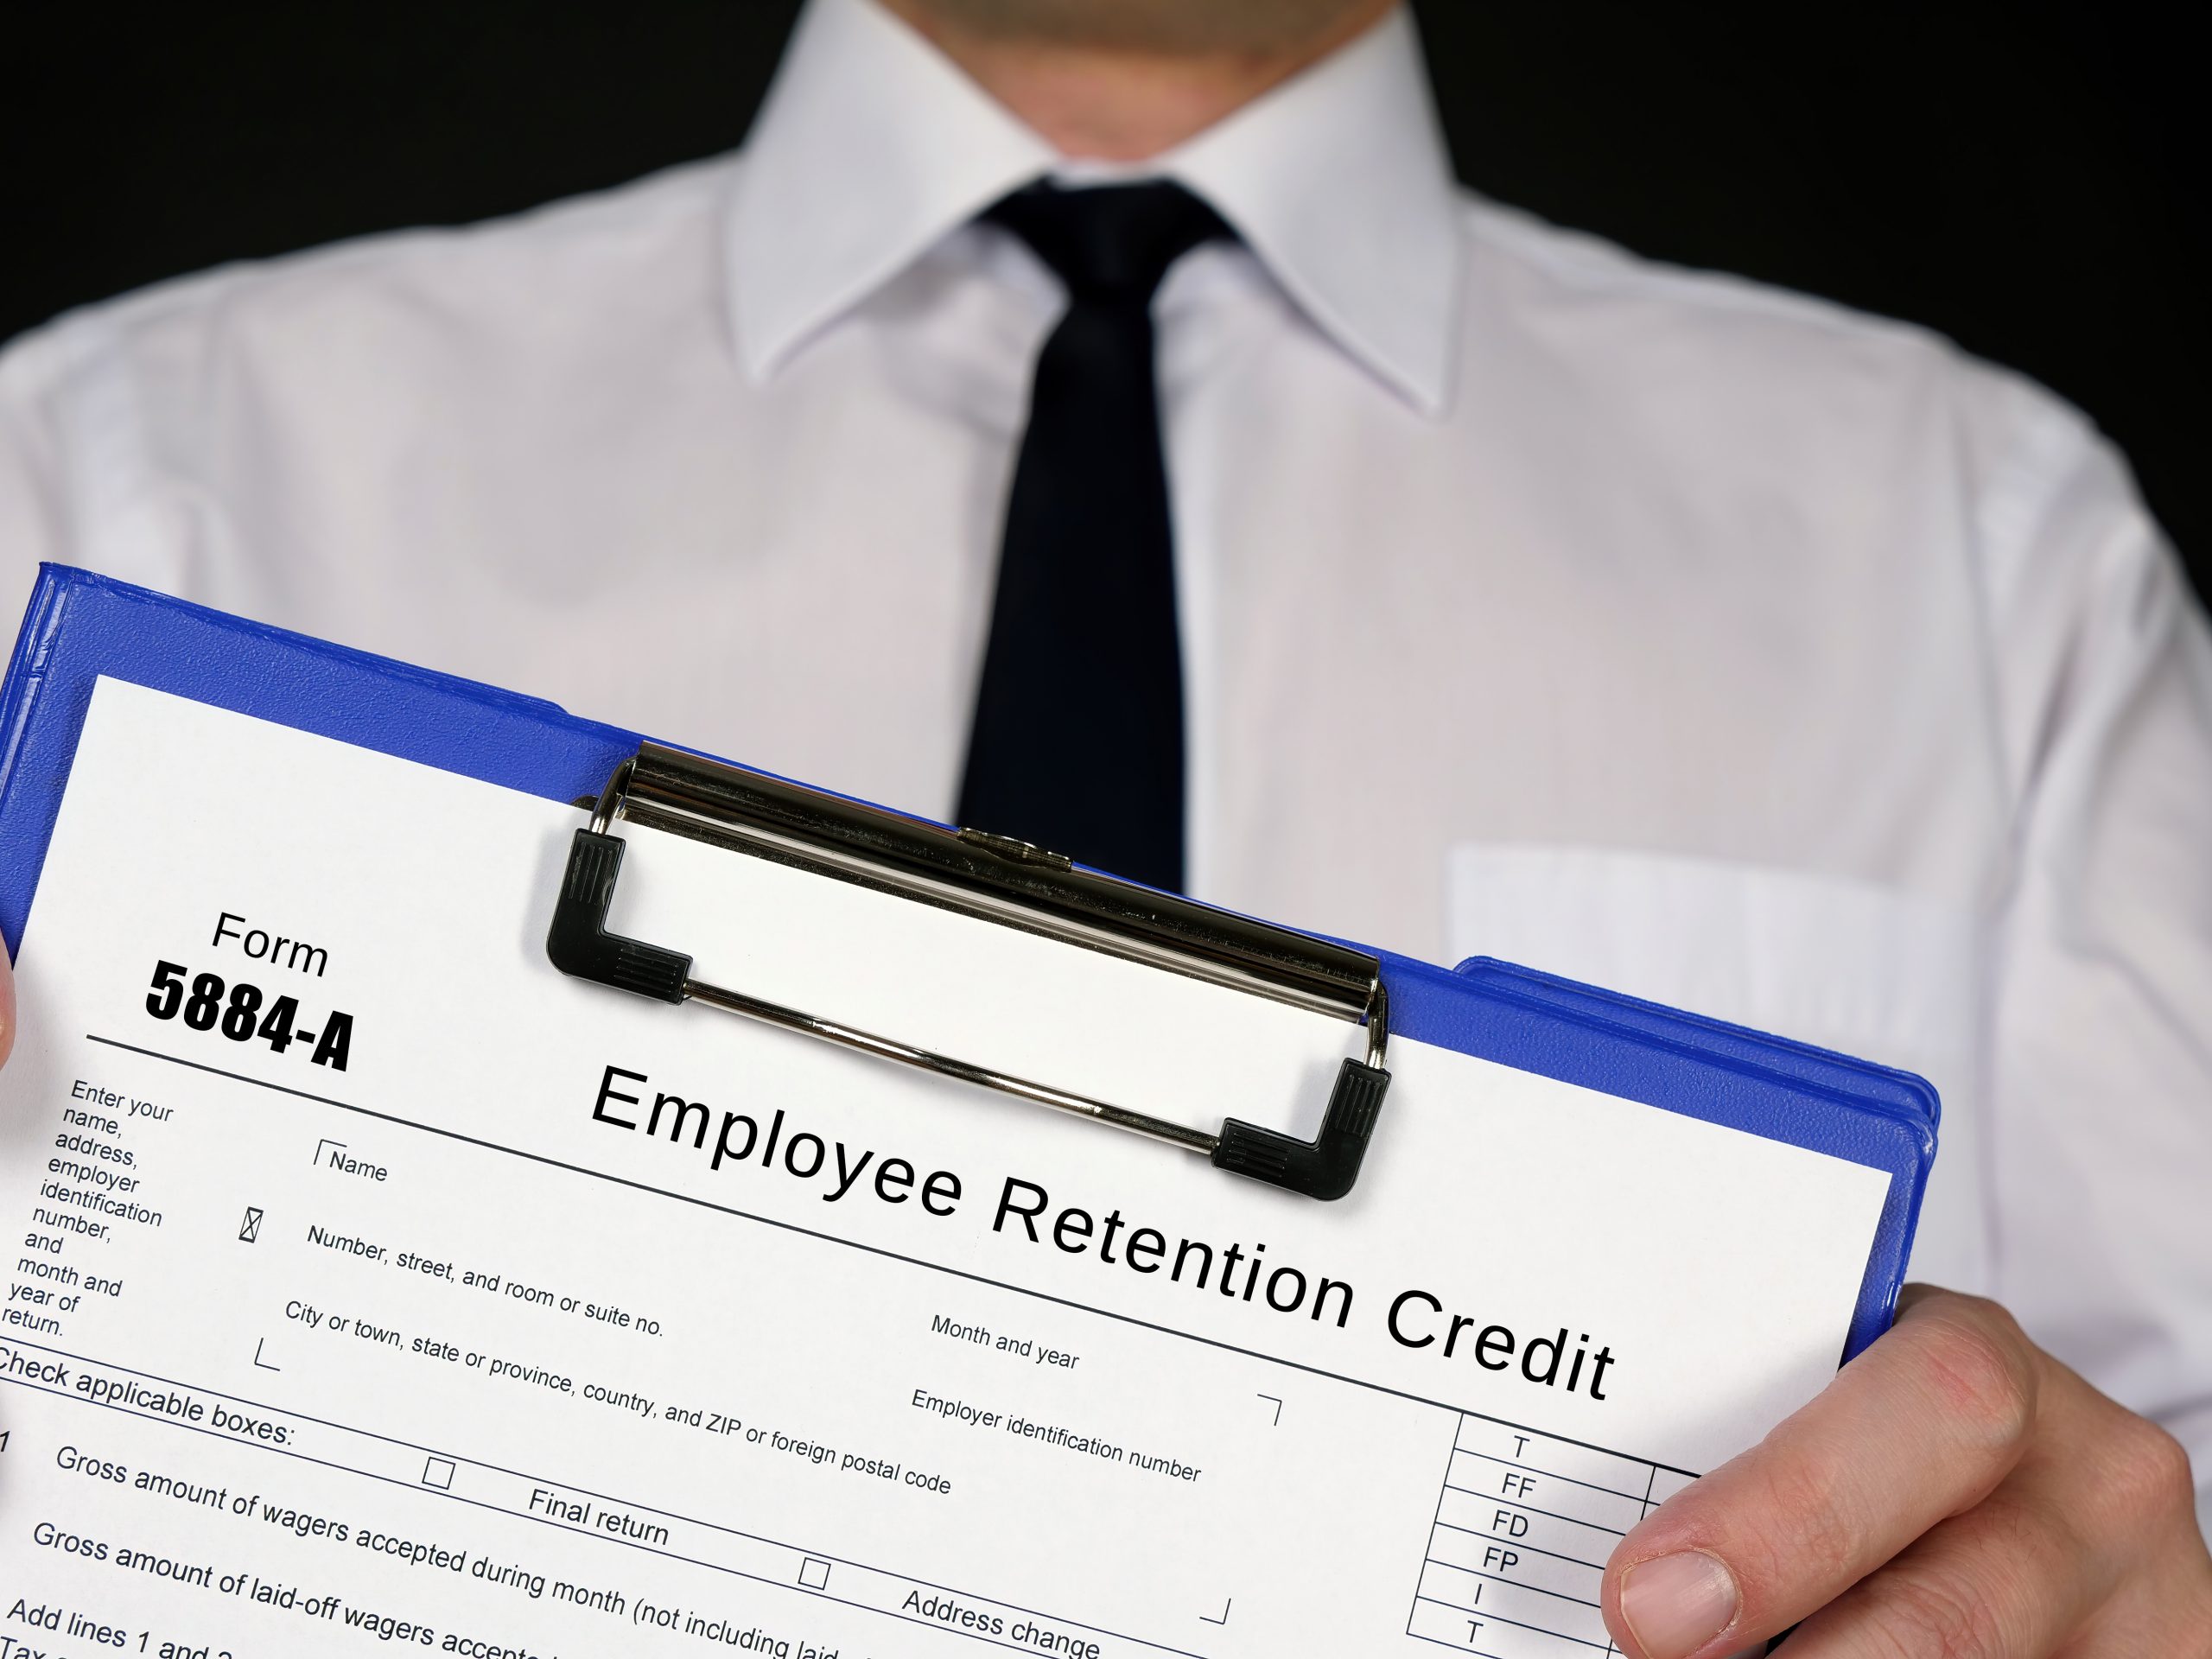 Person in formal wear holding a Form 5884-A Employee Retention Credit.